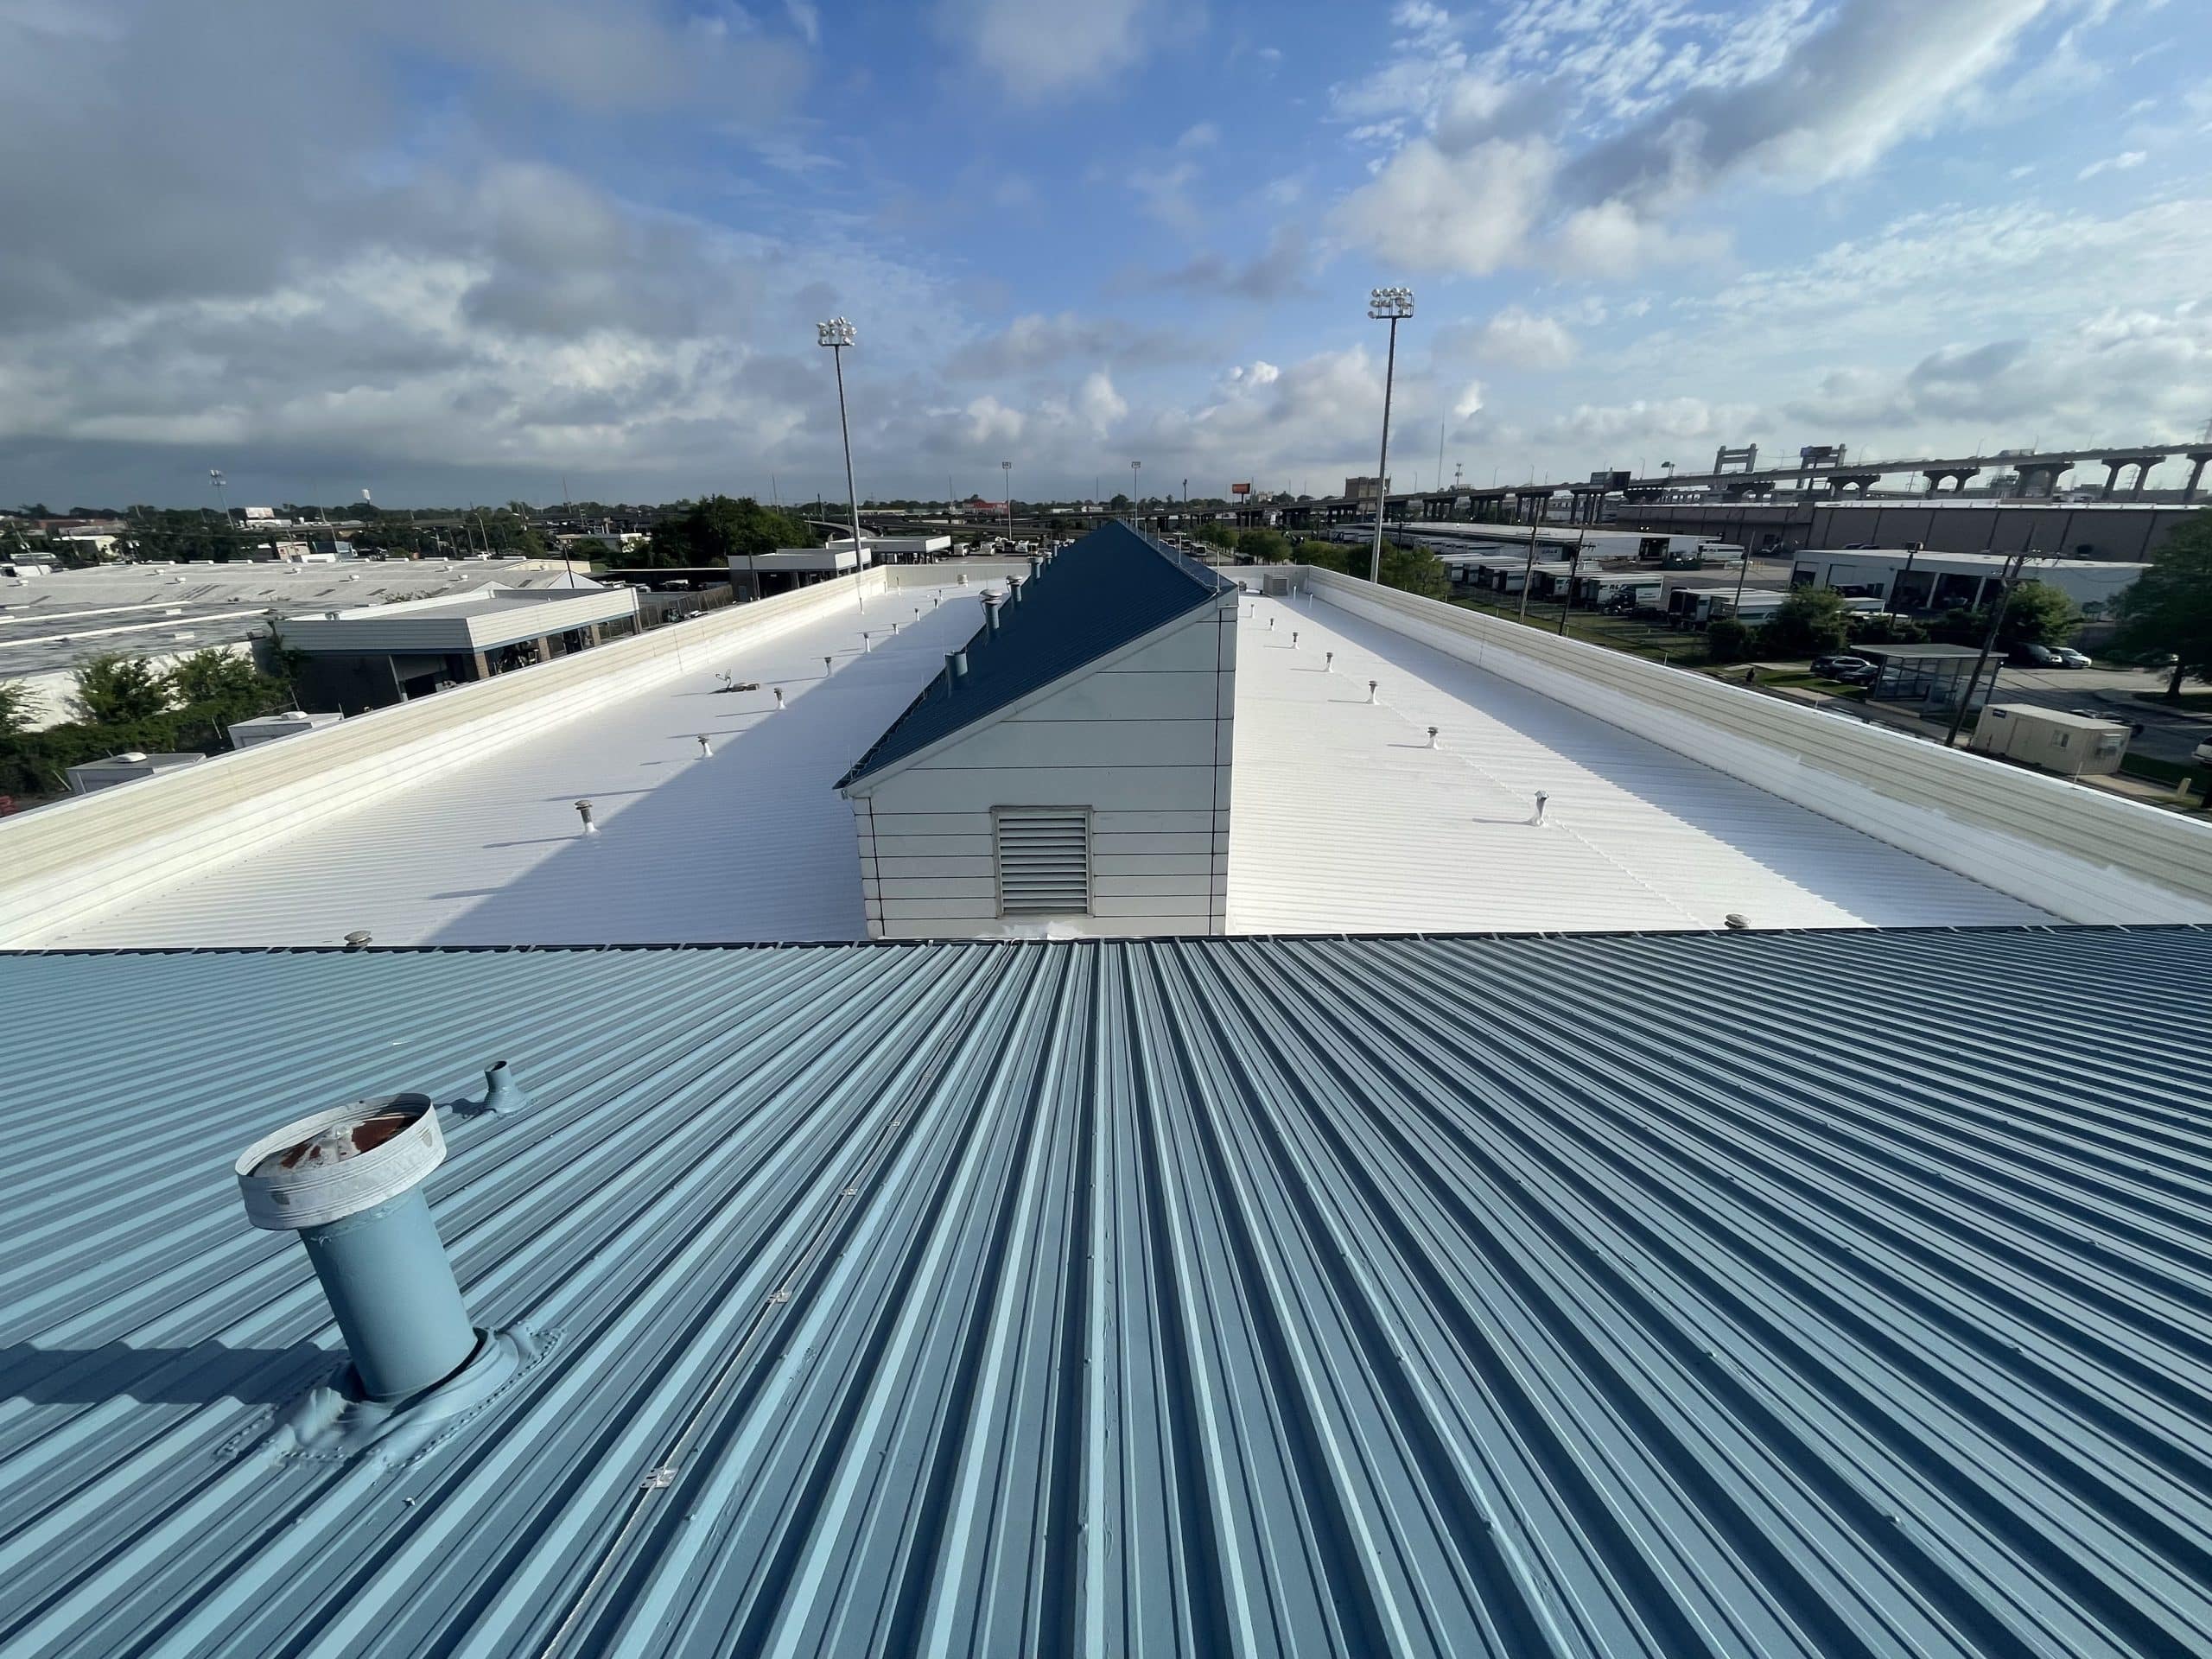 The roof of a building with a blue metal roof.